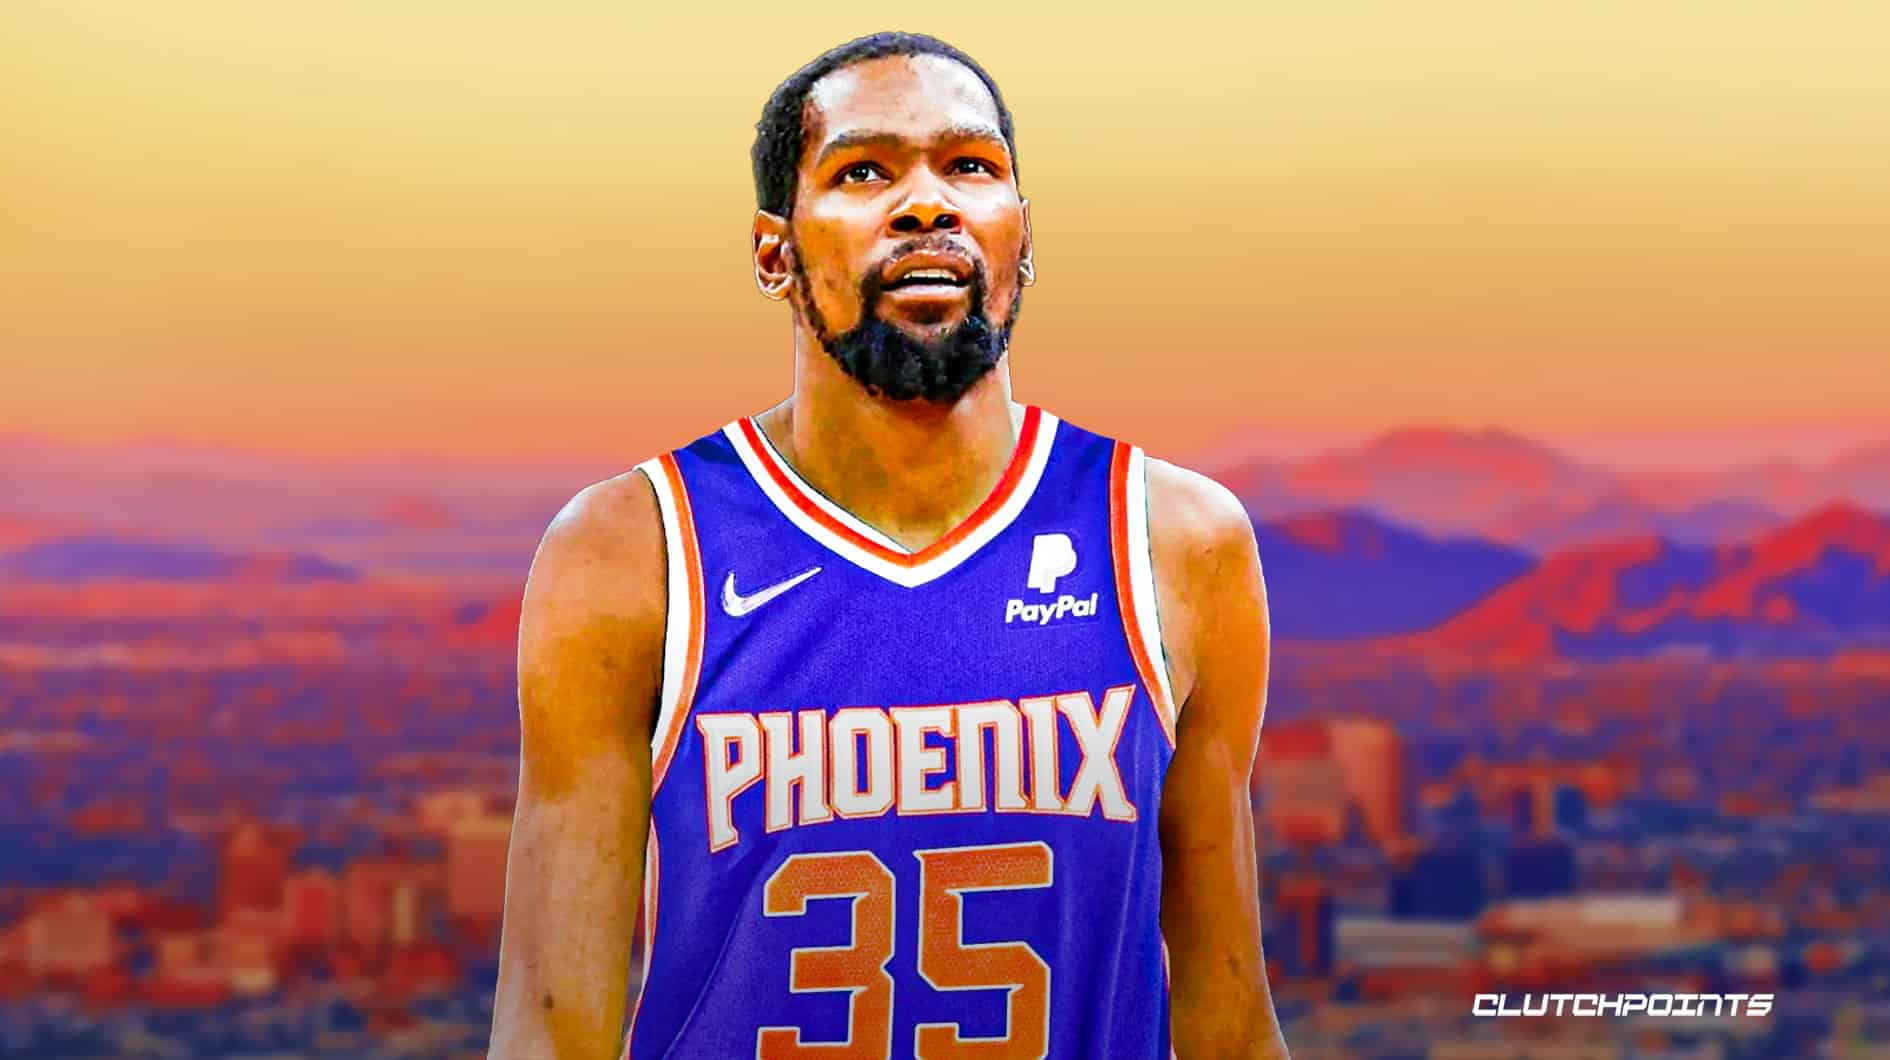 Kevin Durant Officially in the Sunburst Unis 😍😍 : r/suns